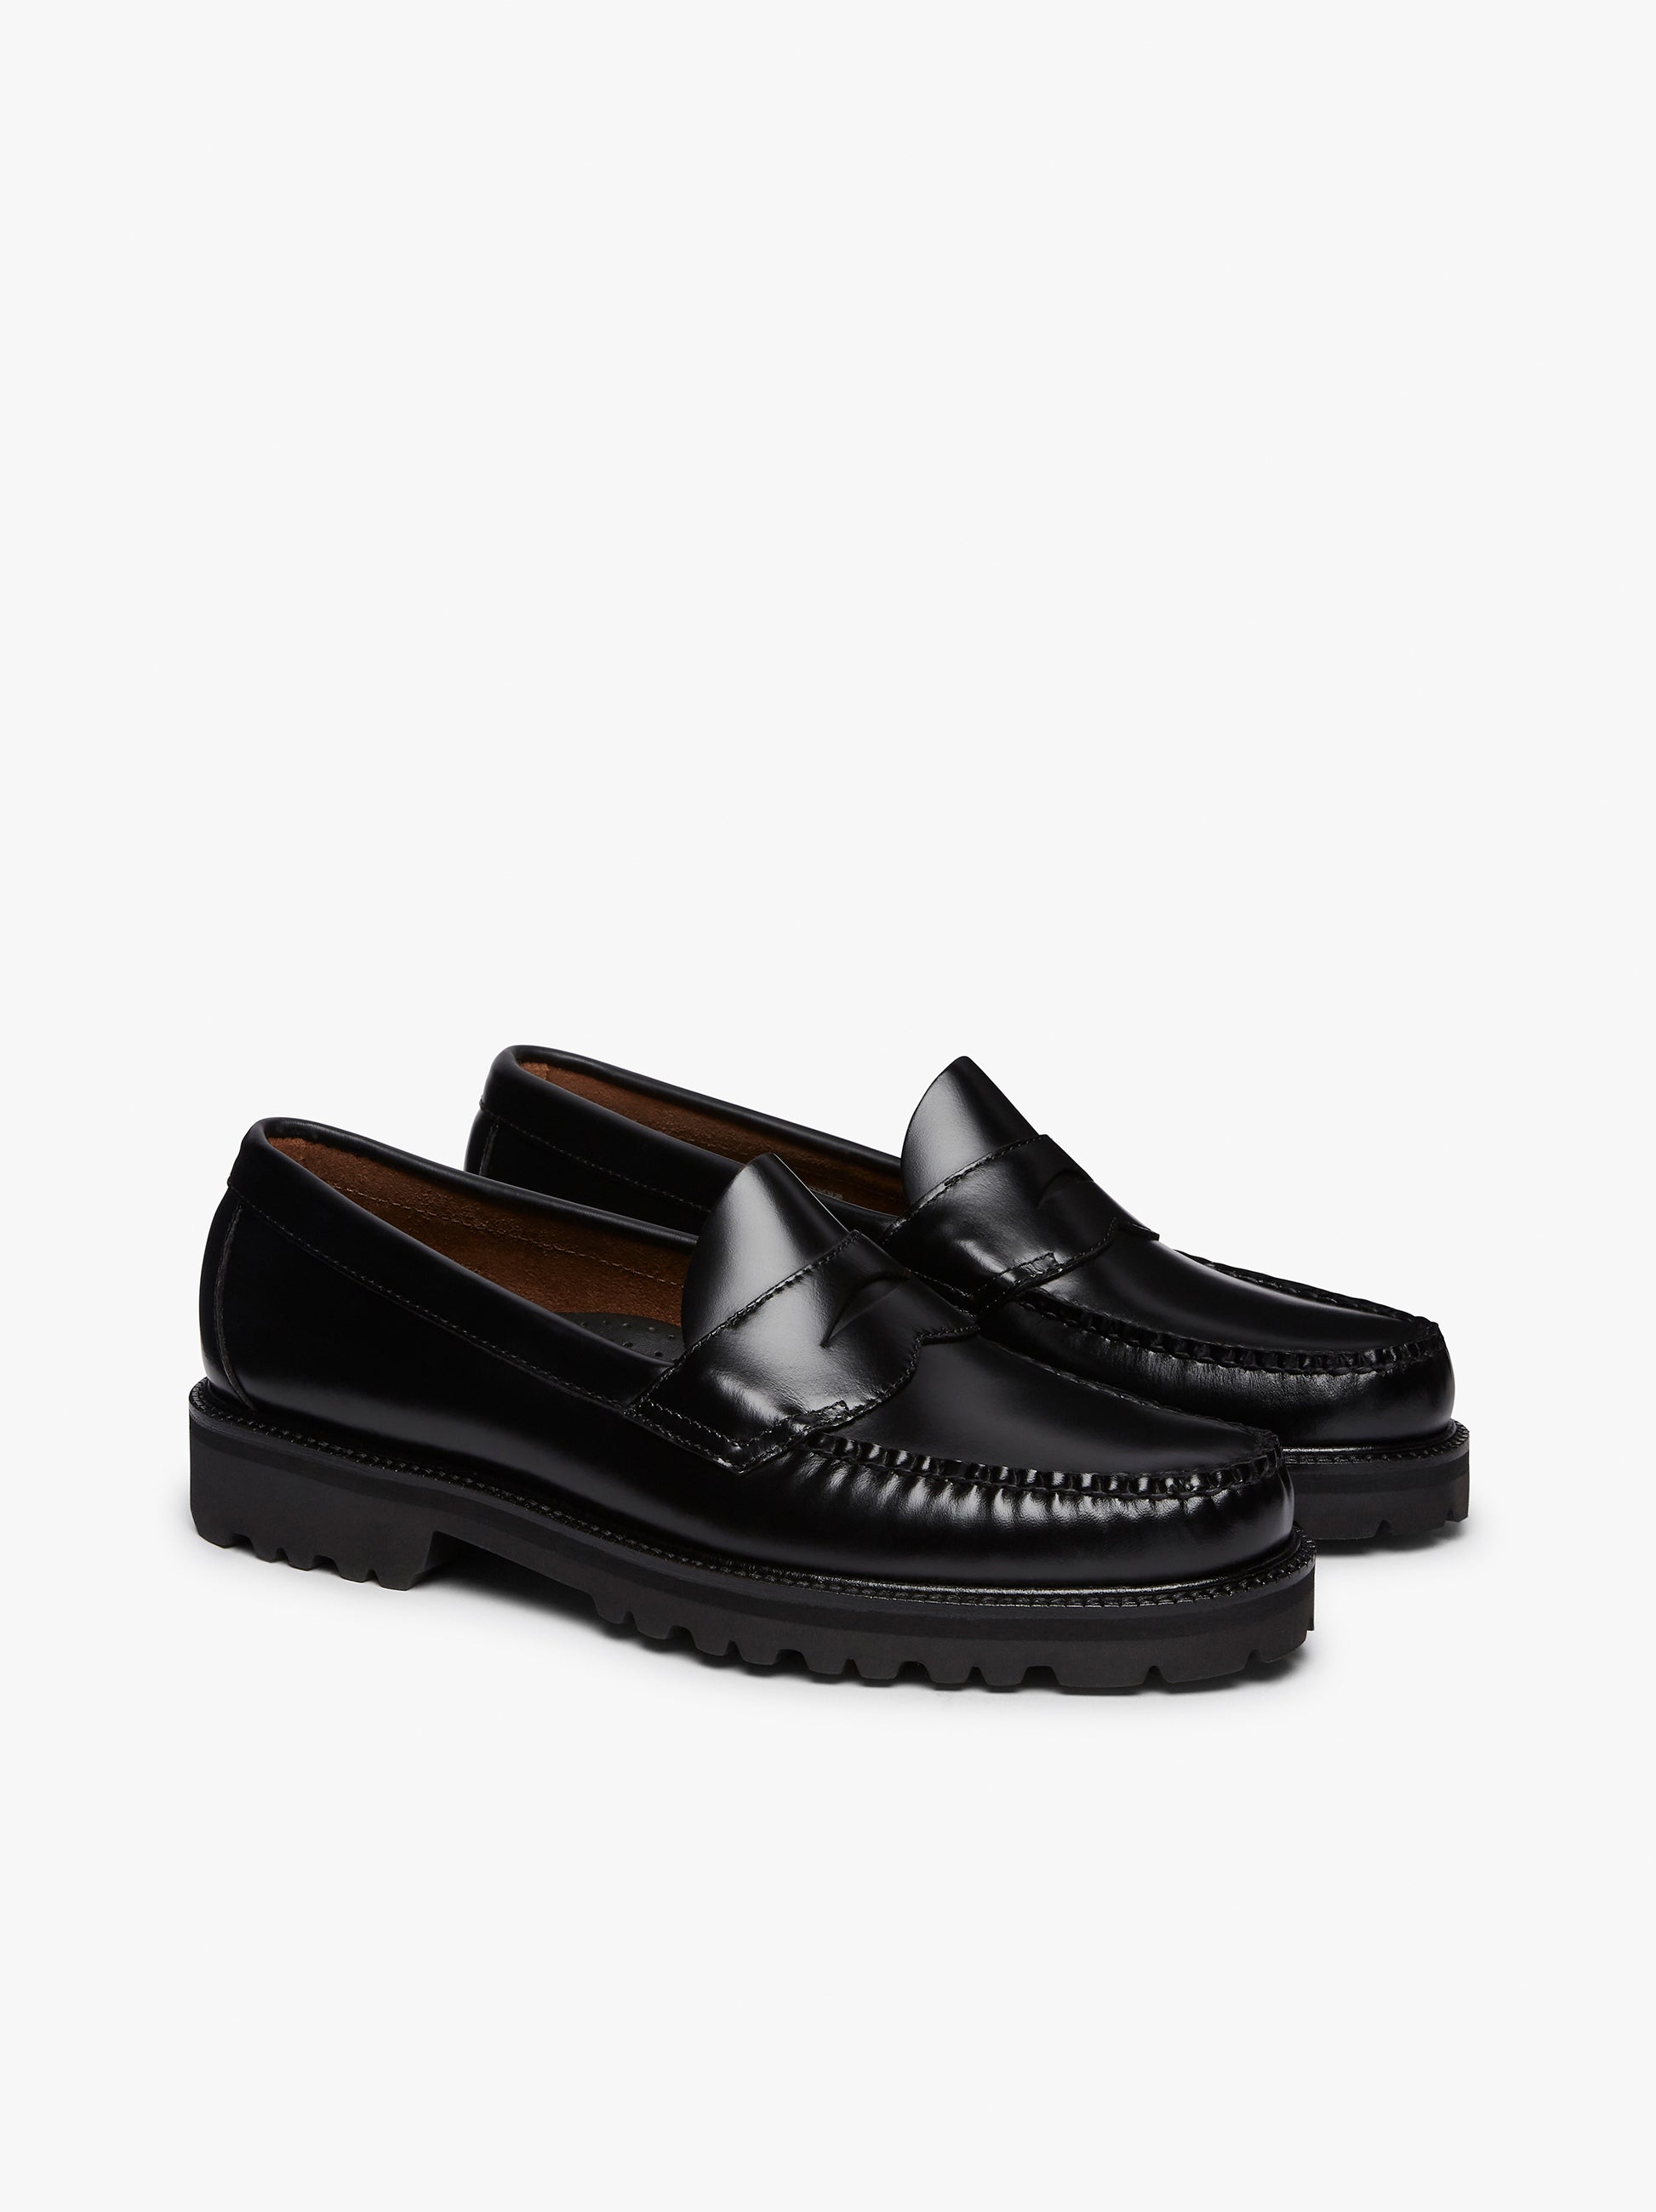 Mens Black Loafers Leather | Weejuns Logan â€“ G.H.BASS – G.H.BASS